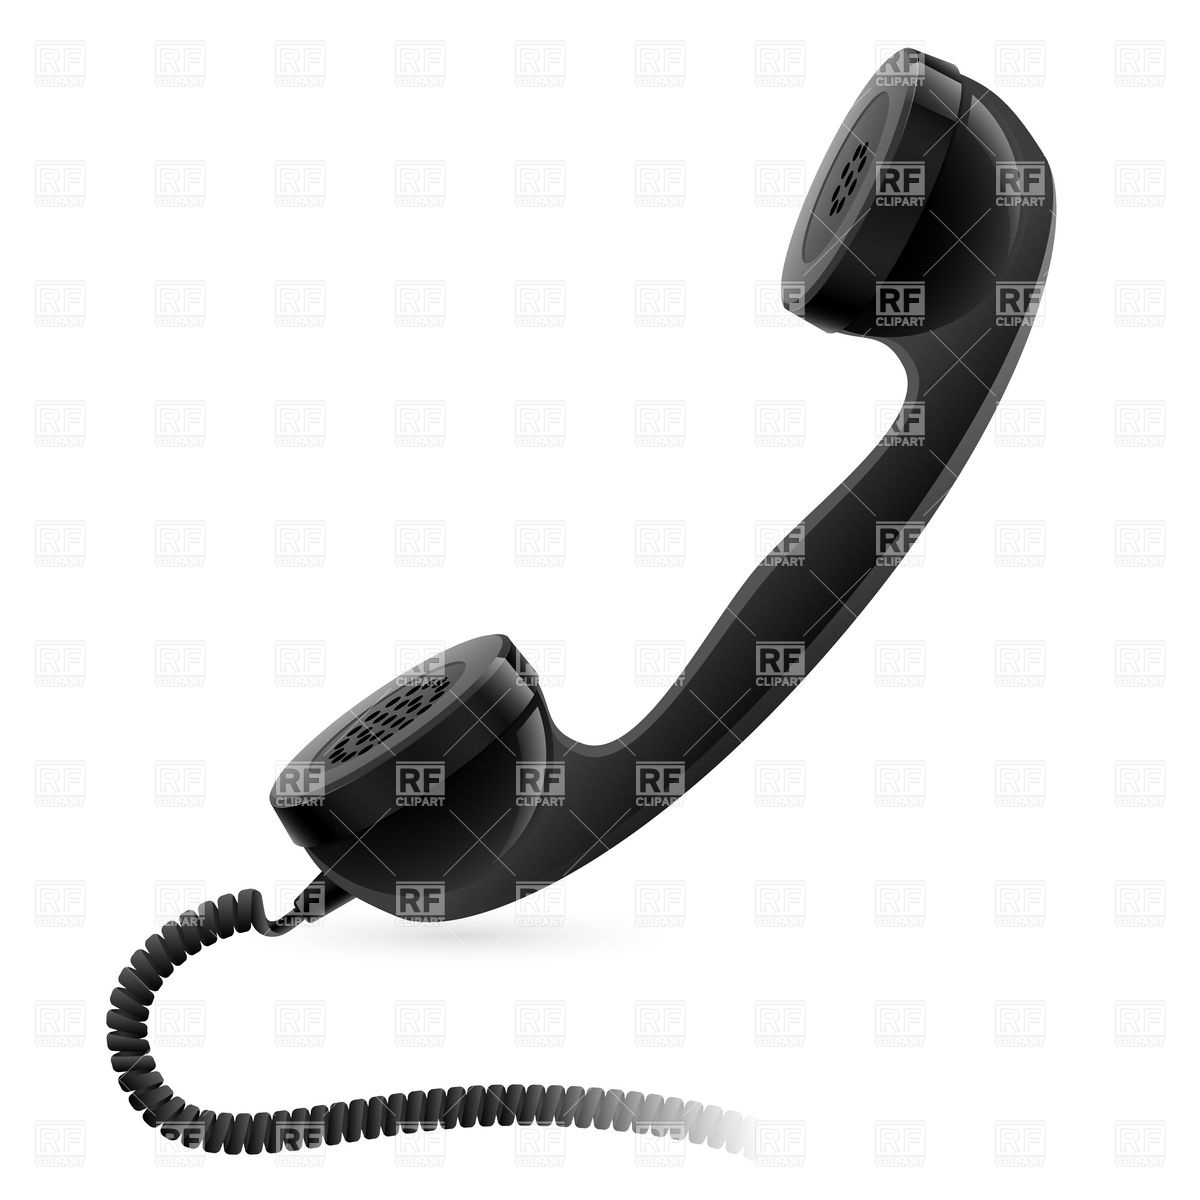 Old Black Telephone Handset 7238 Objects Download Royalty Free